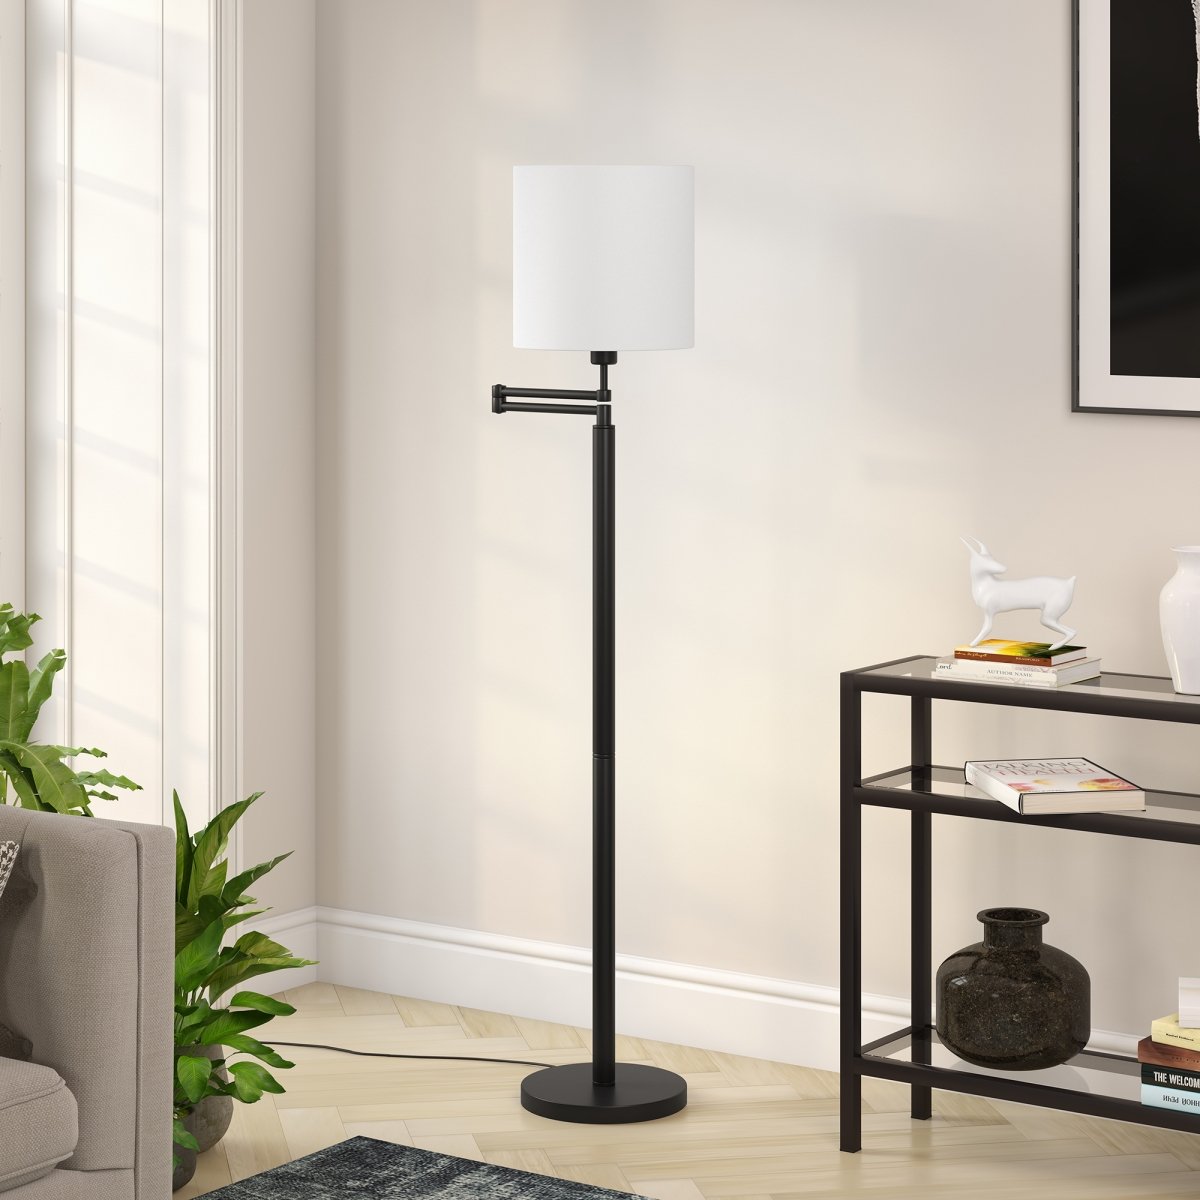 Picture of Henn & Hart FL0348 Moby Swing Arm Blackened Bronze Floor Lamp with Round Shade